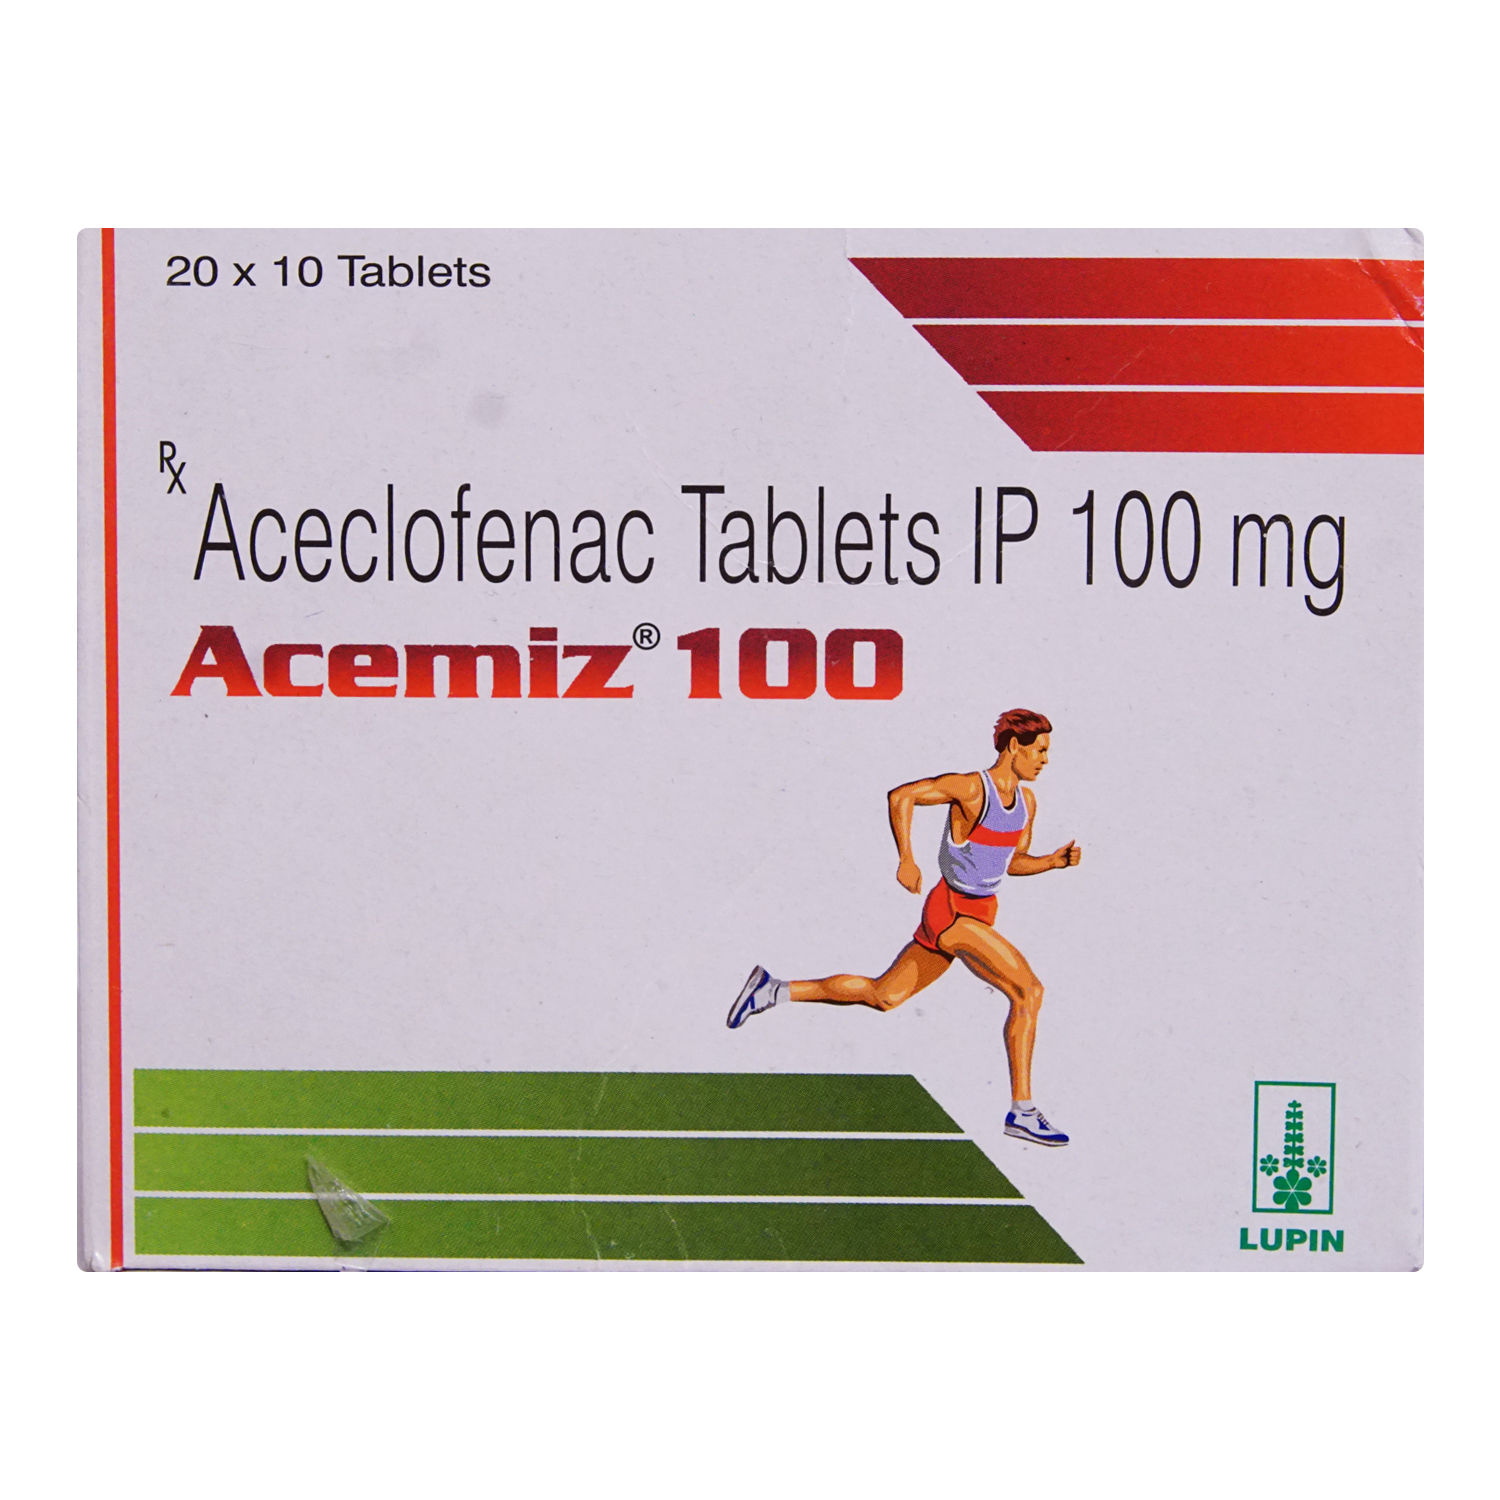 Acemiz 100 Tablet, Uses, Side Effects, Price